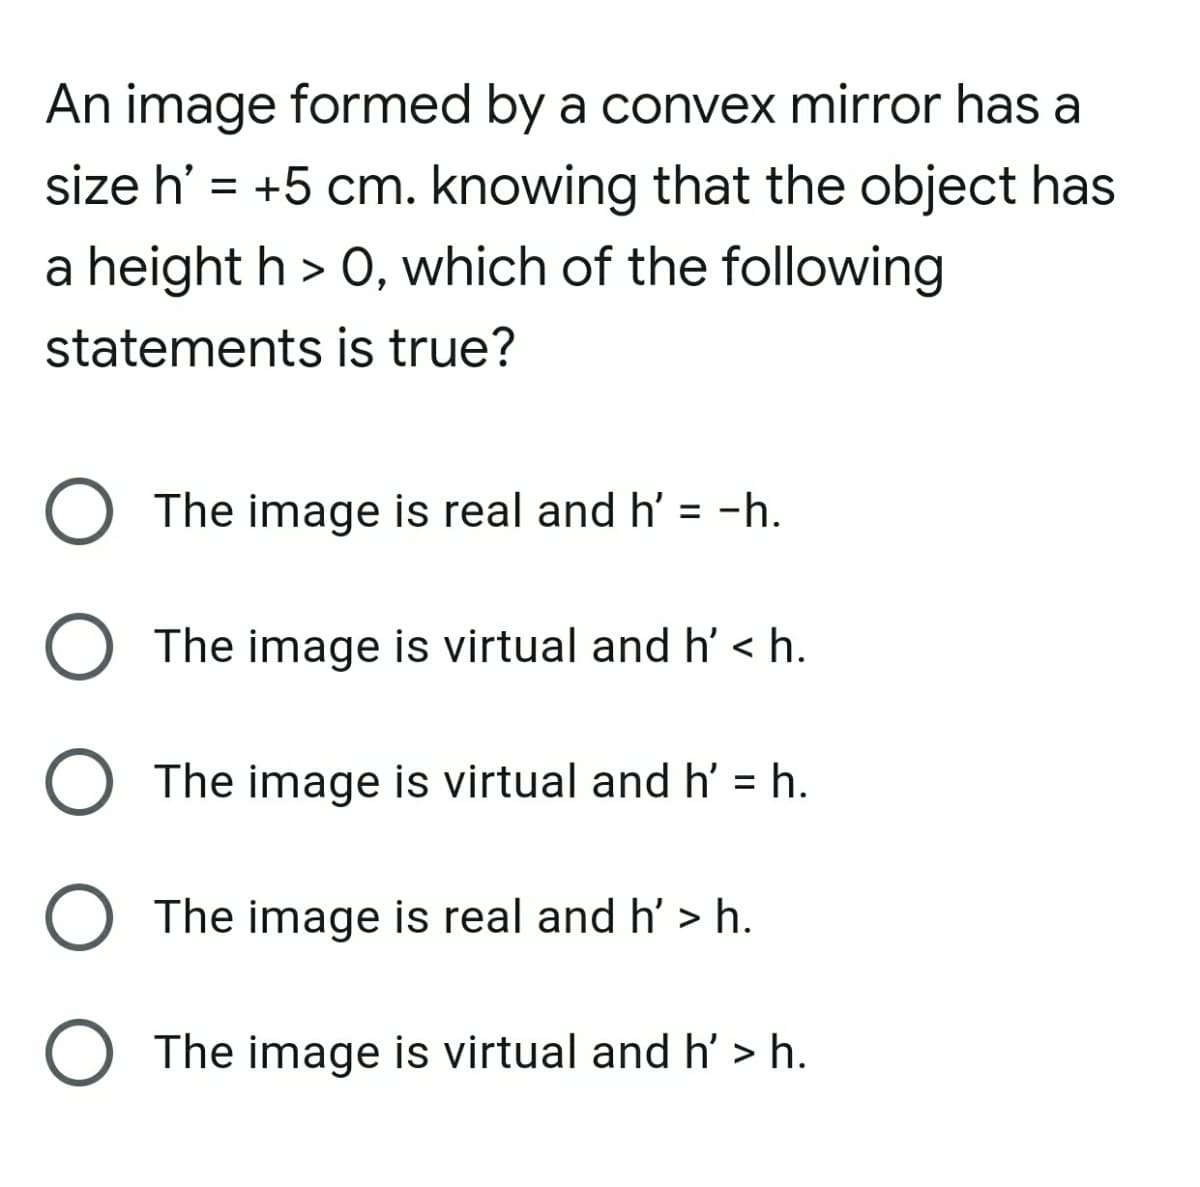 An image formed by a convex mirror has a
size h' = +5 cm. knowing that the object has
a height h > 0, which of the following
statements is true?
O The image is real and h' = -h.
%3D
O The image is virtual and h' < h.
O The image is virtual and h' = h.
%3D
O The image is real and h' > h.
O The image is virtual and h' > h.
